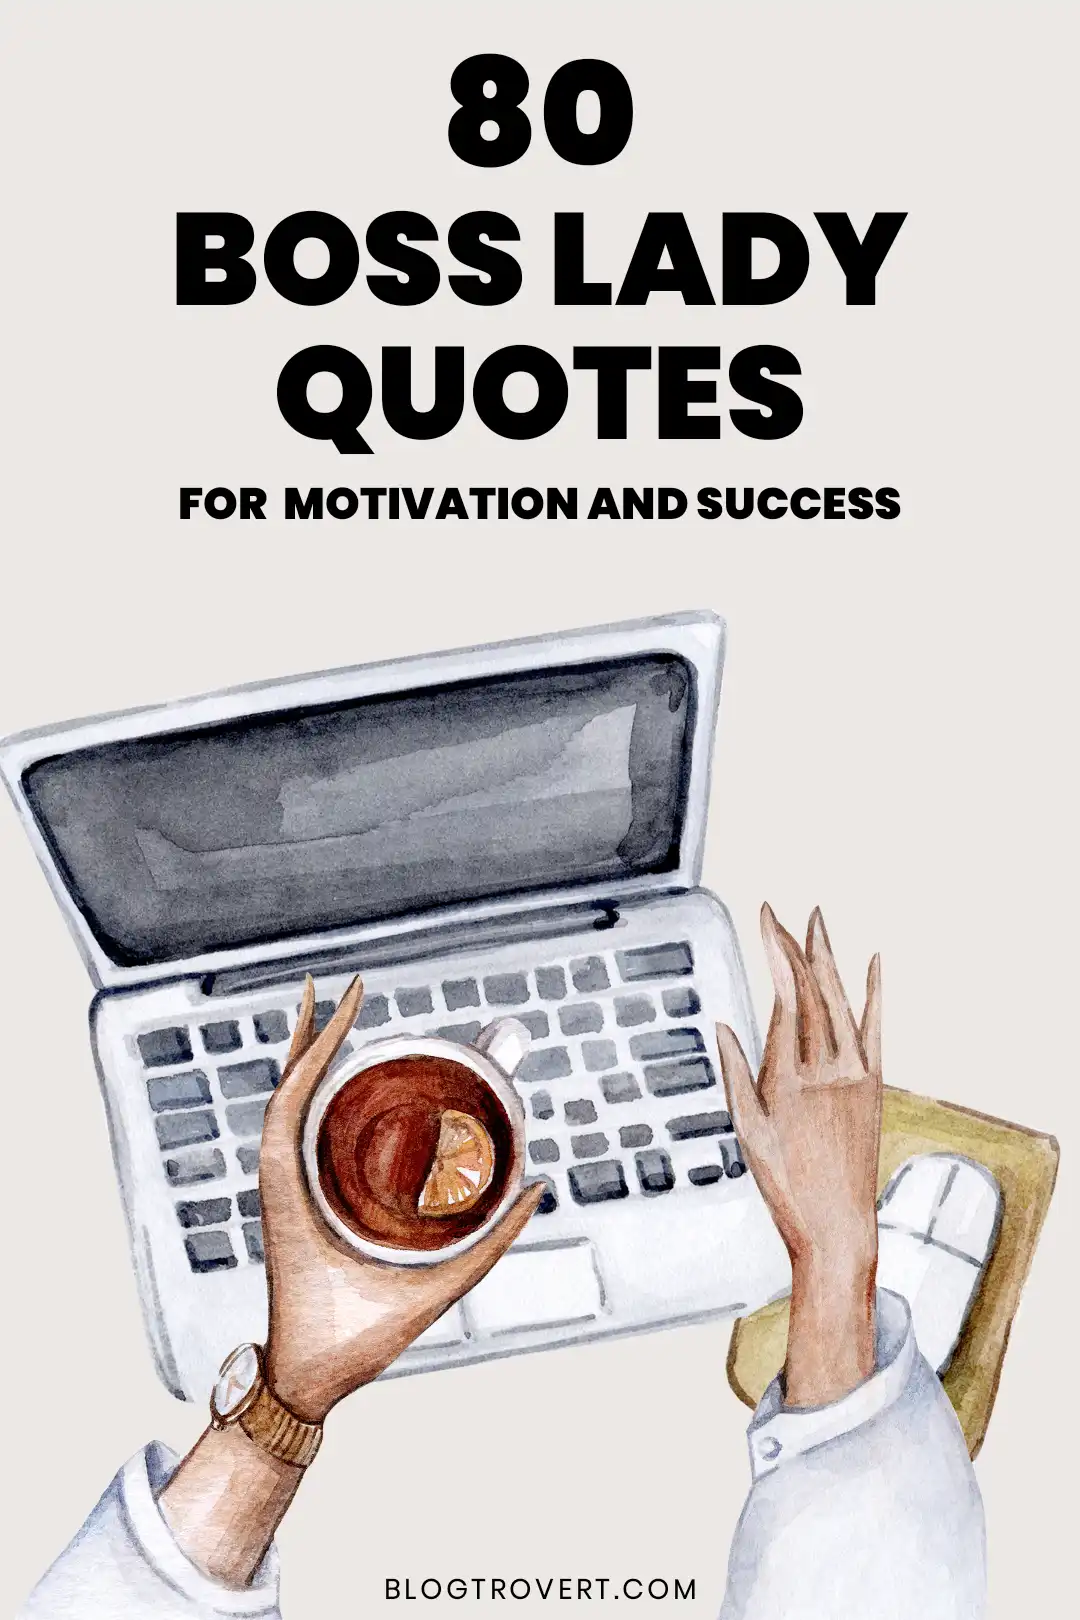 106 boss lady quotes for motivation, success and more 1